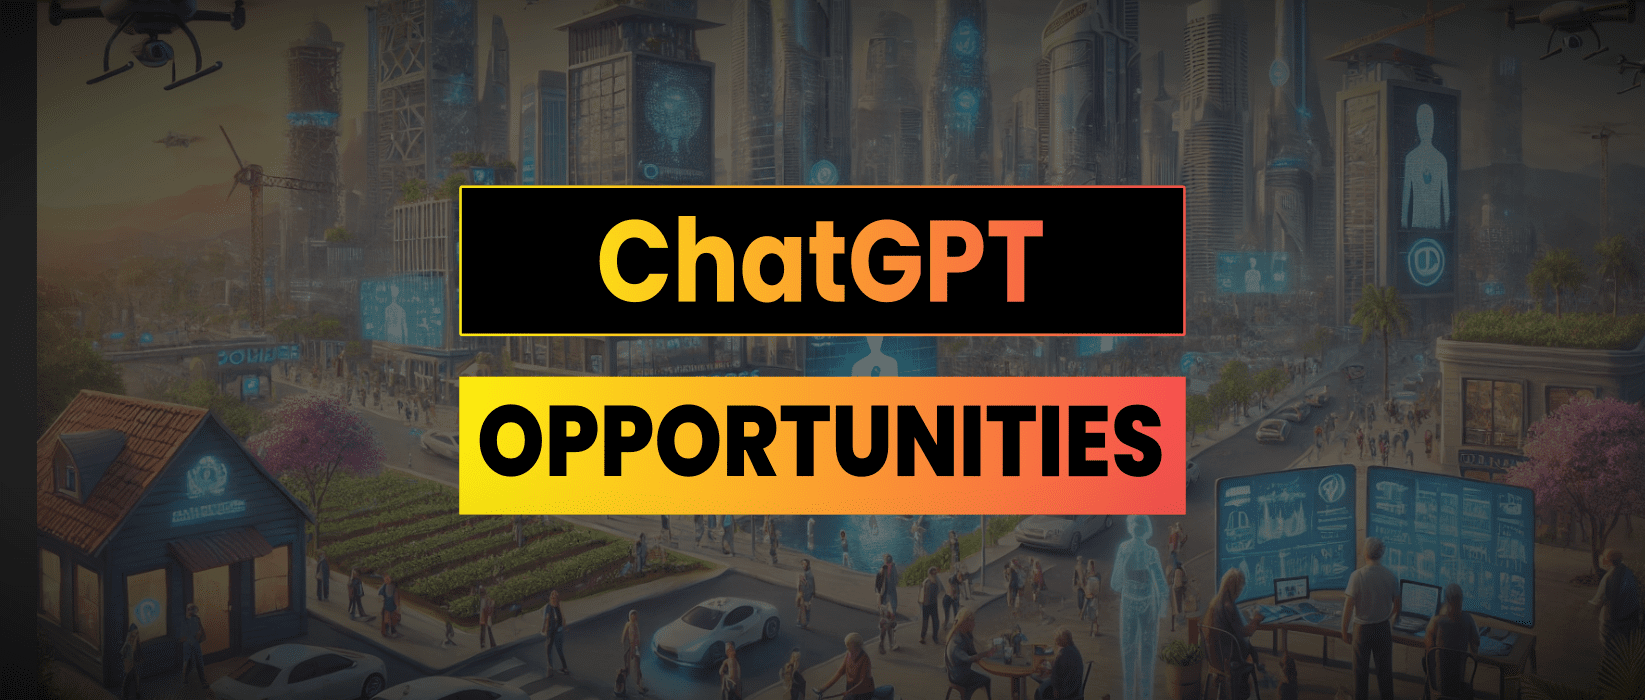 Using ChatGPT To Explore Future Investment Opportunities